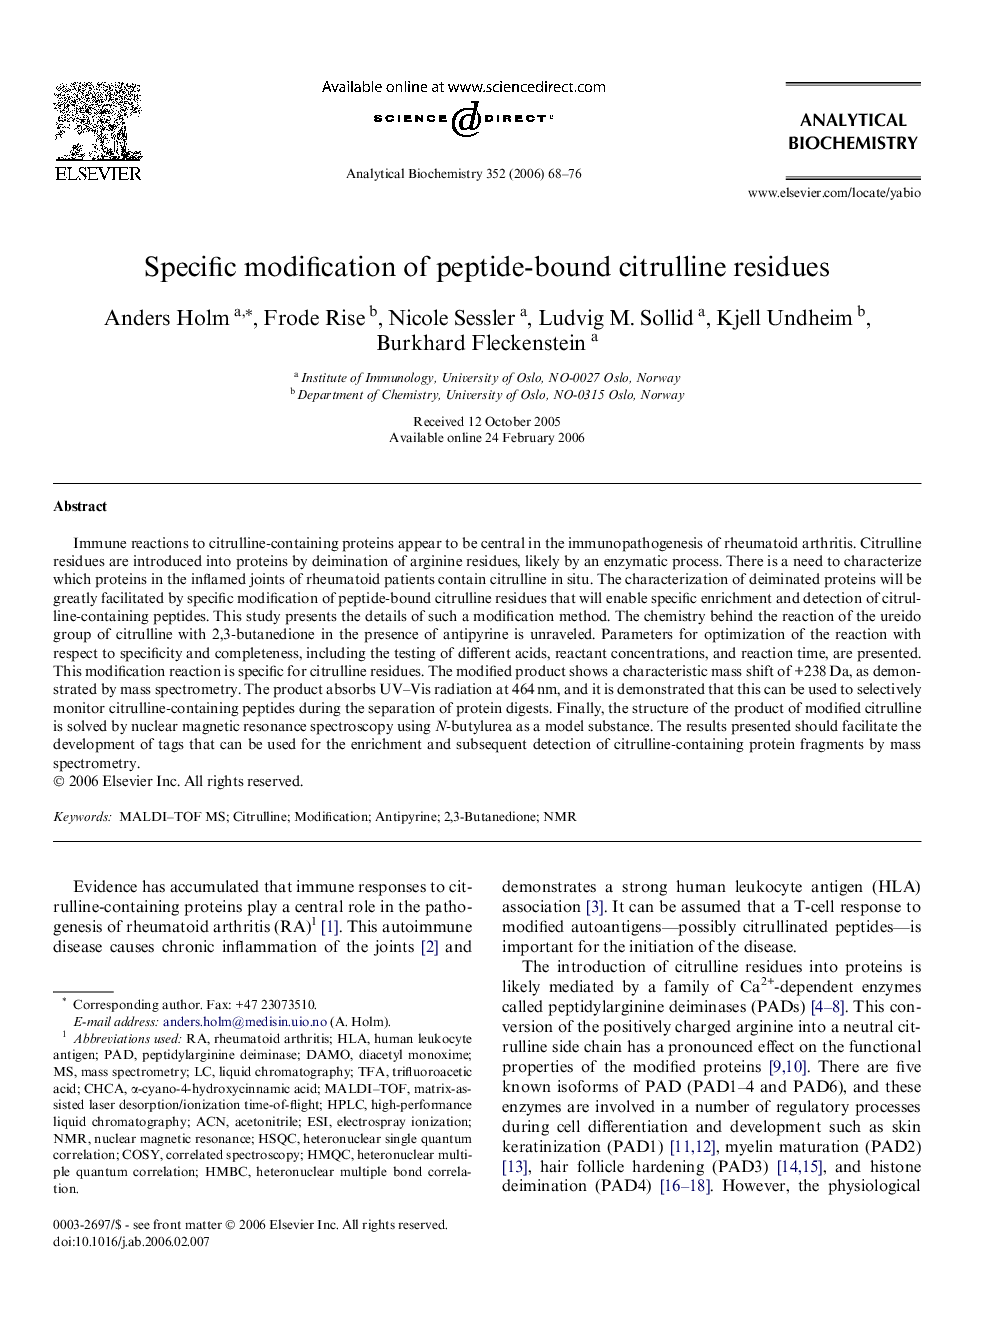 Specific modification of peptide-bound citrulline residues